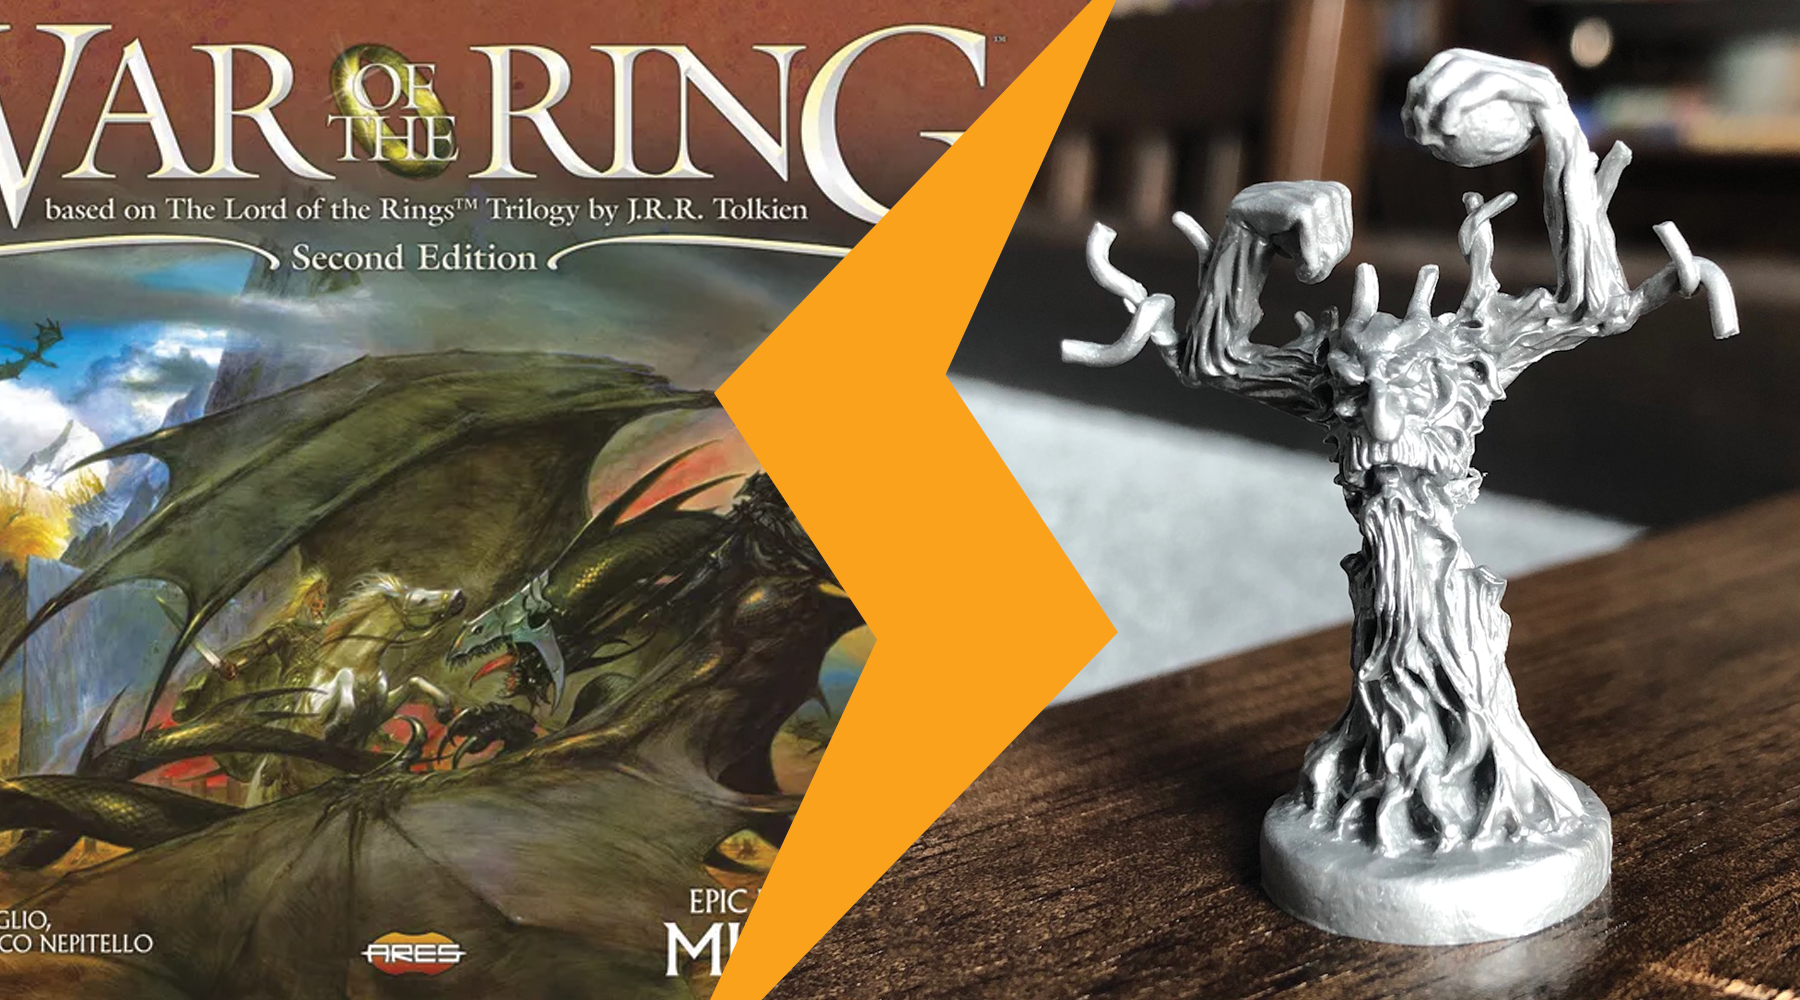 A side by side combination of two images separated by a yellow lightning bolt. The left image is the front cover of the game War of the Ring, with a woman on a horse fighting a dragon-like creature. The right image is a close up photo of a plastic tree figure with a face.